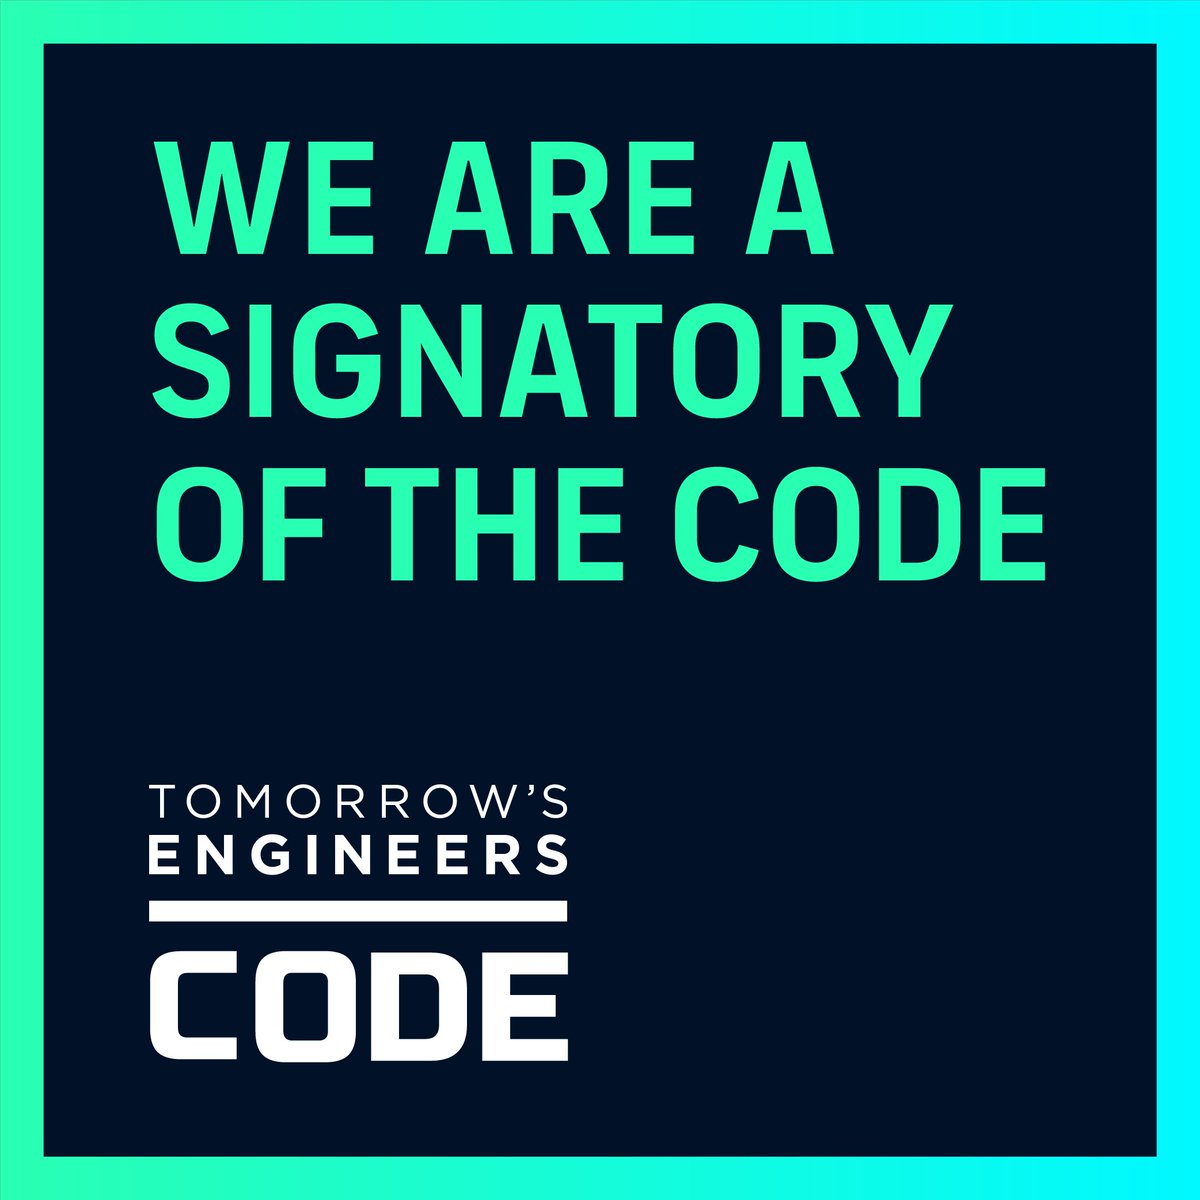 We're proud to be a Signatory of The Code! Join the community and help us increase the diversity and number of engineers. bit.ly/3Qdx6tP @TheTECode #TheCode #STEMEd #STEMDiversity @HudCompEng @Hud_SCLS  @HuddersfieldUni